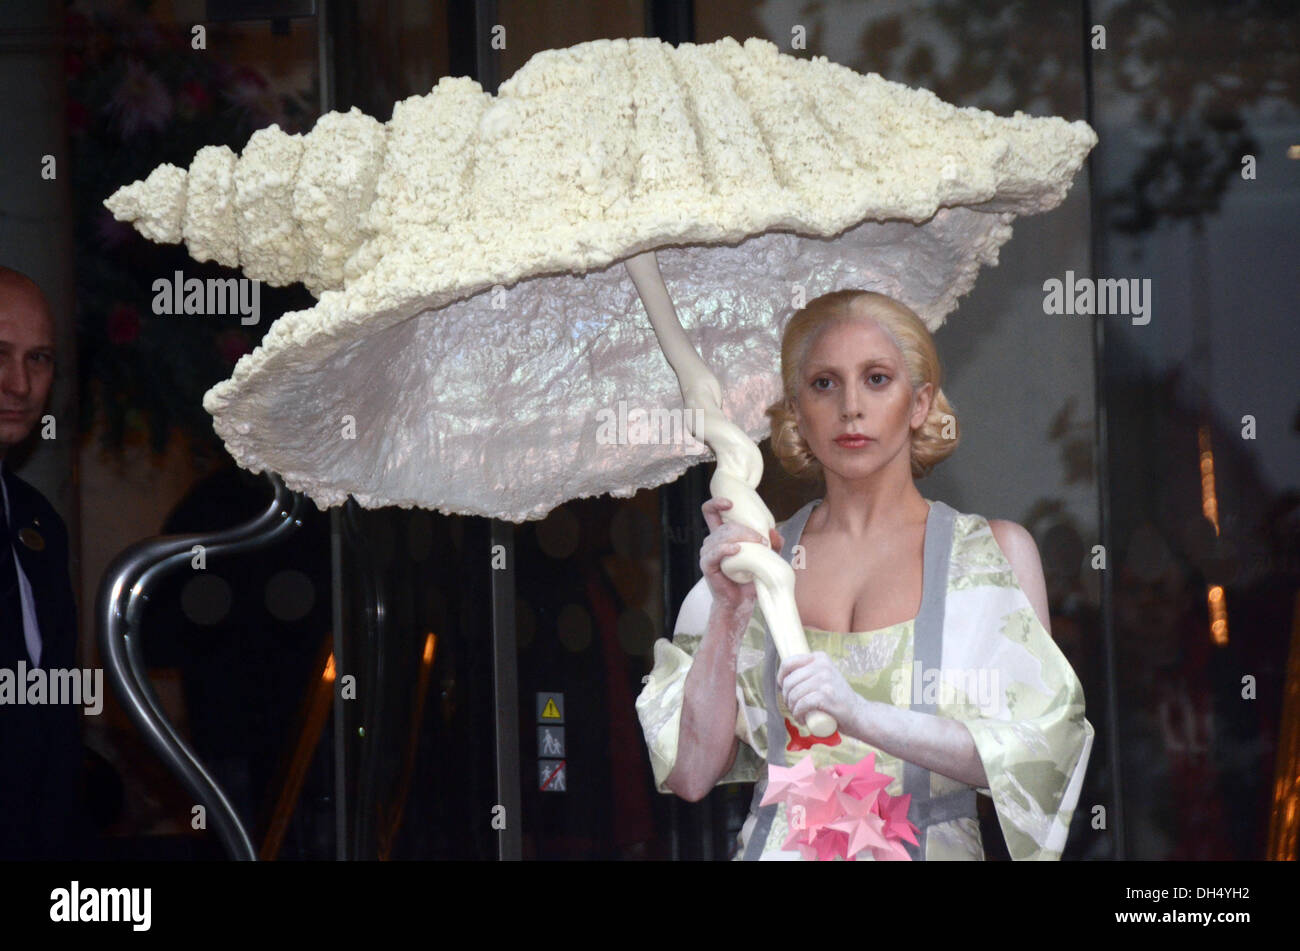 London, UK. 31st October 2013. Lady Gaga with conch leaves Langham Hotel London 31/10/2013 Credit:  JOHNNY ARMSTEAD/Alamy Live News Stock Photo